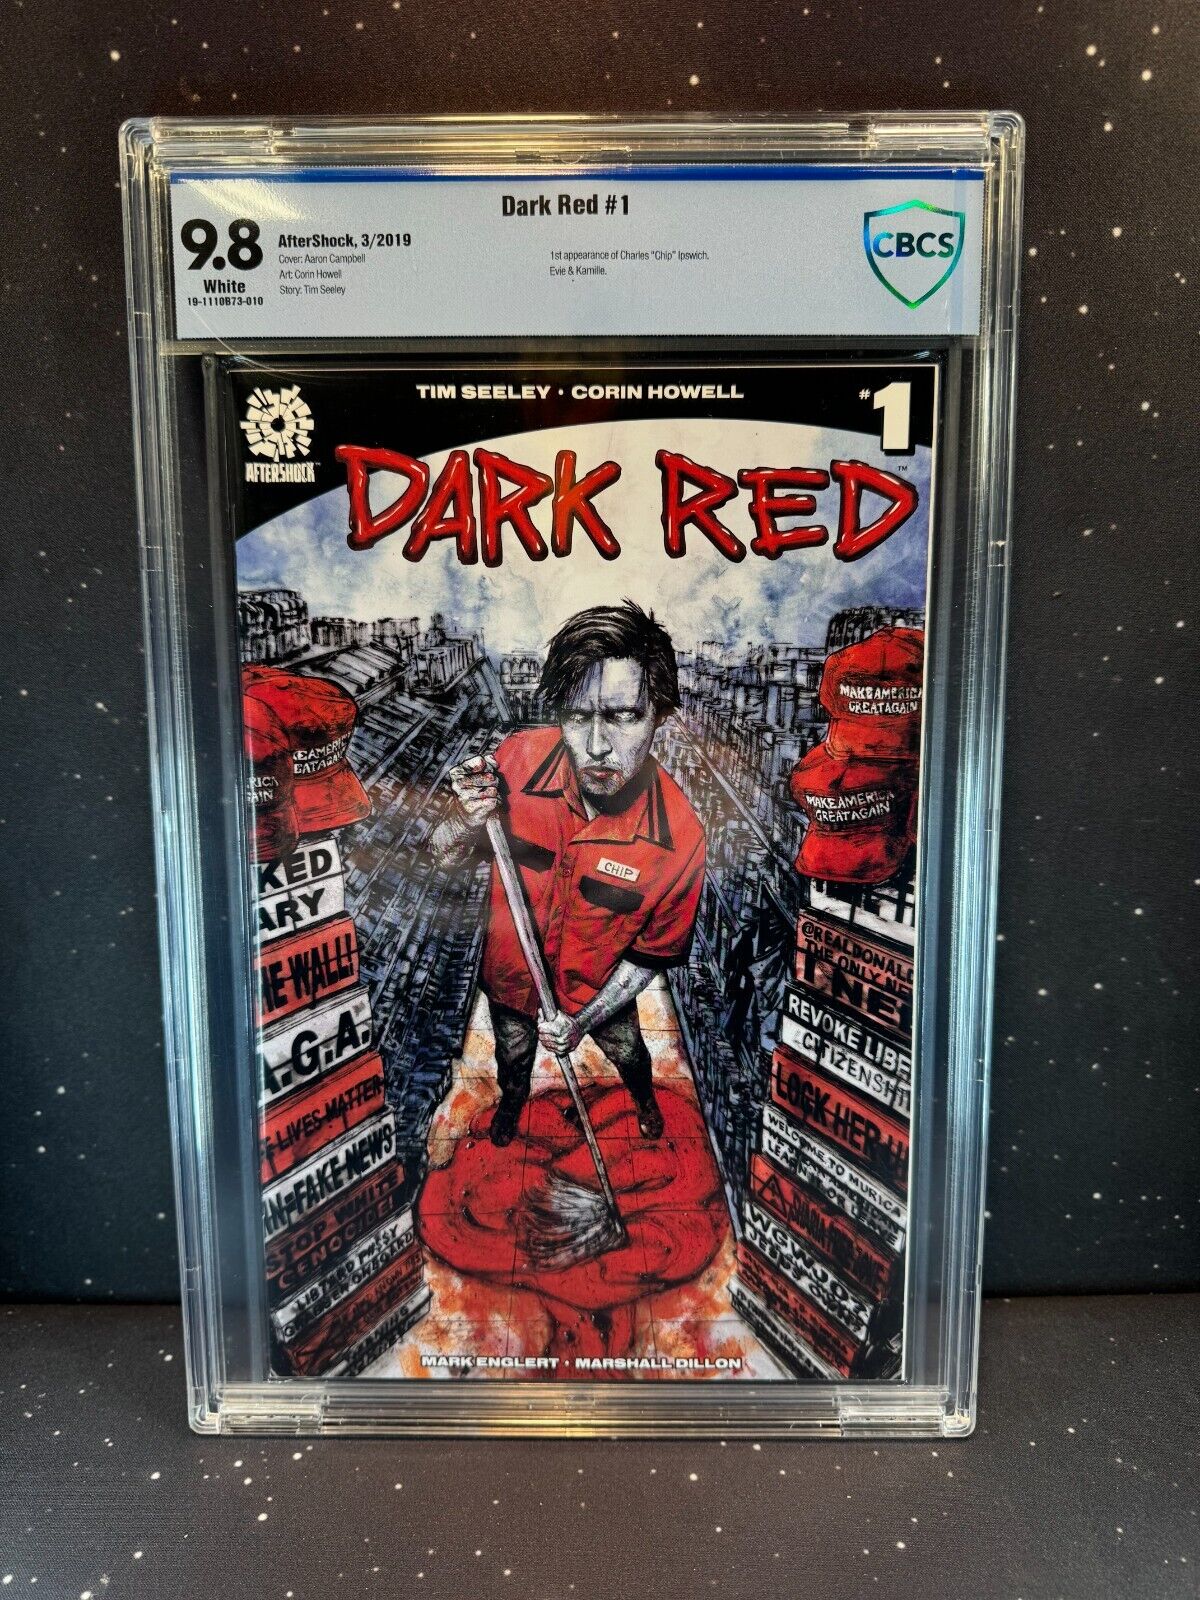 2019 Aftershock Dark Red #1 CBCS 9.8 White Cover A